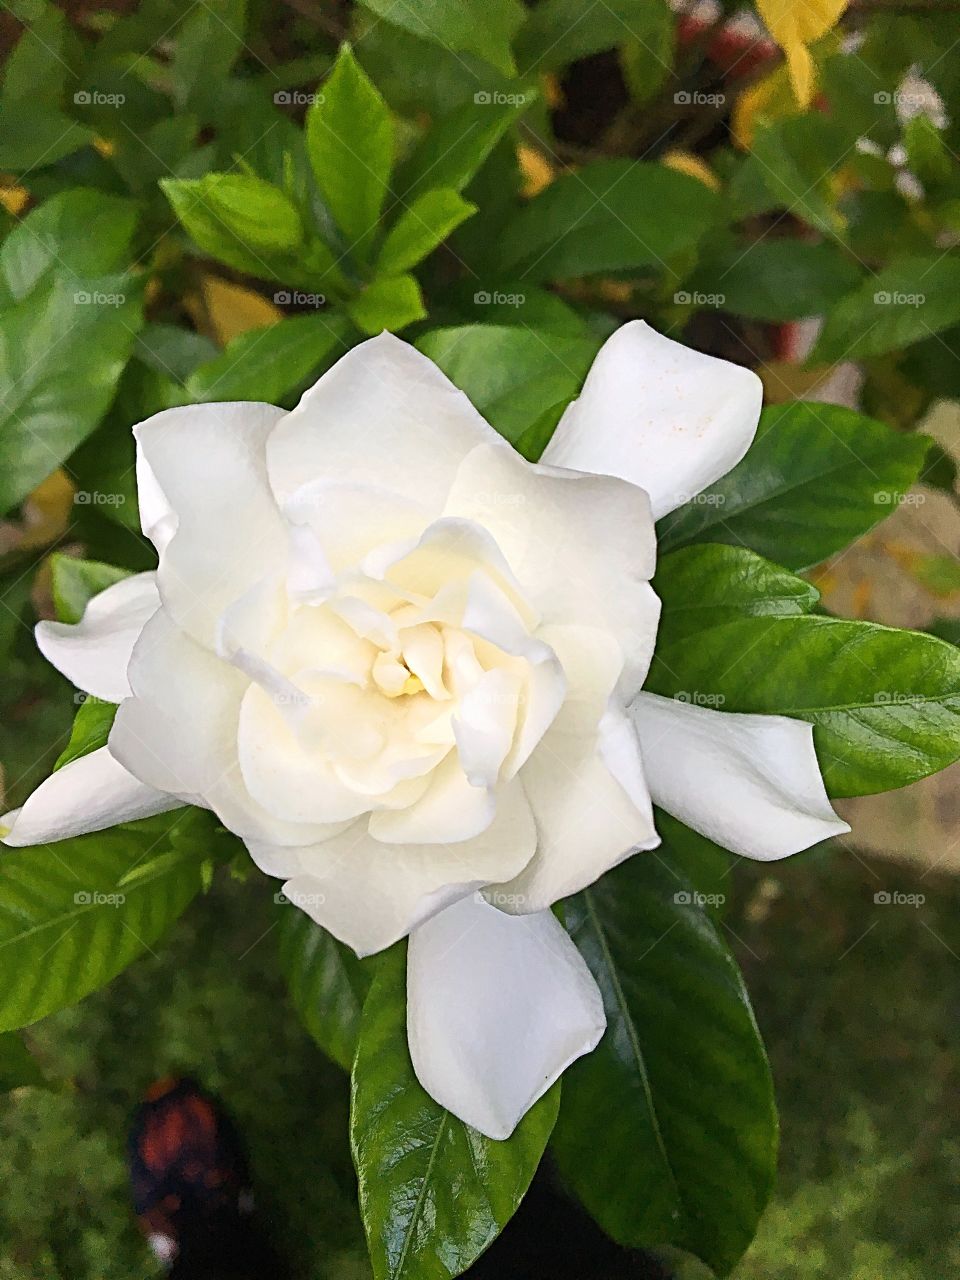 Another pretty white flower in the backyard this morning 